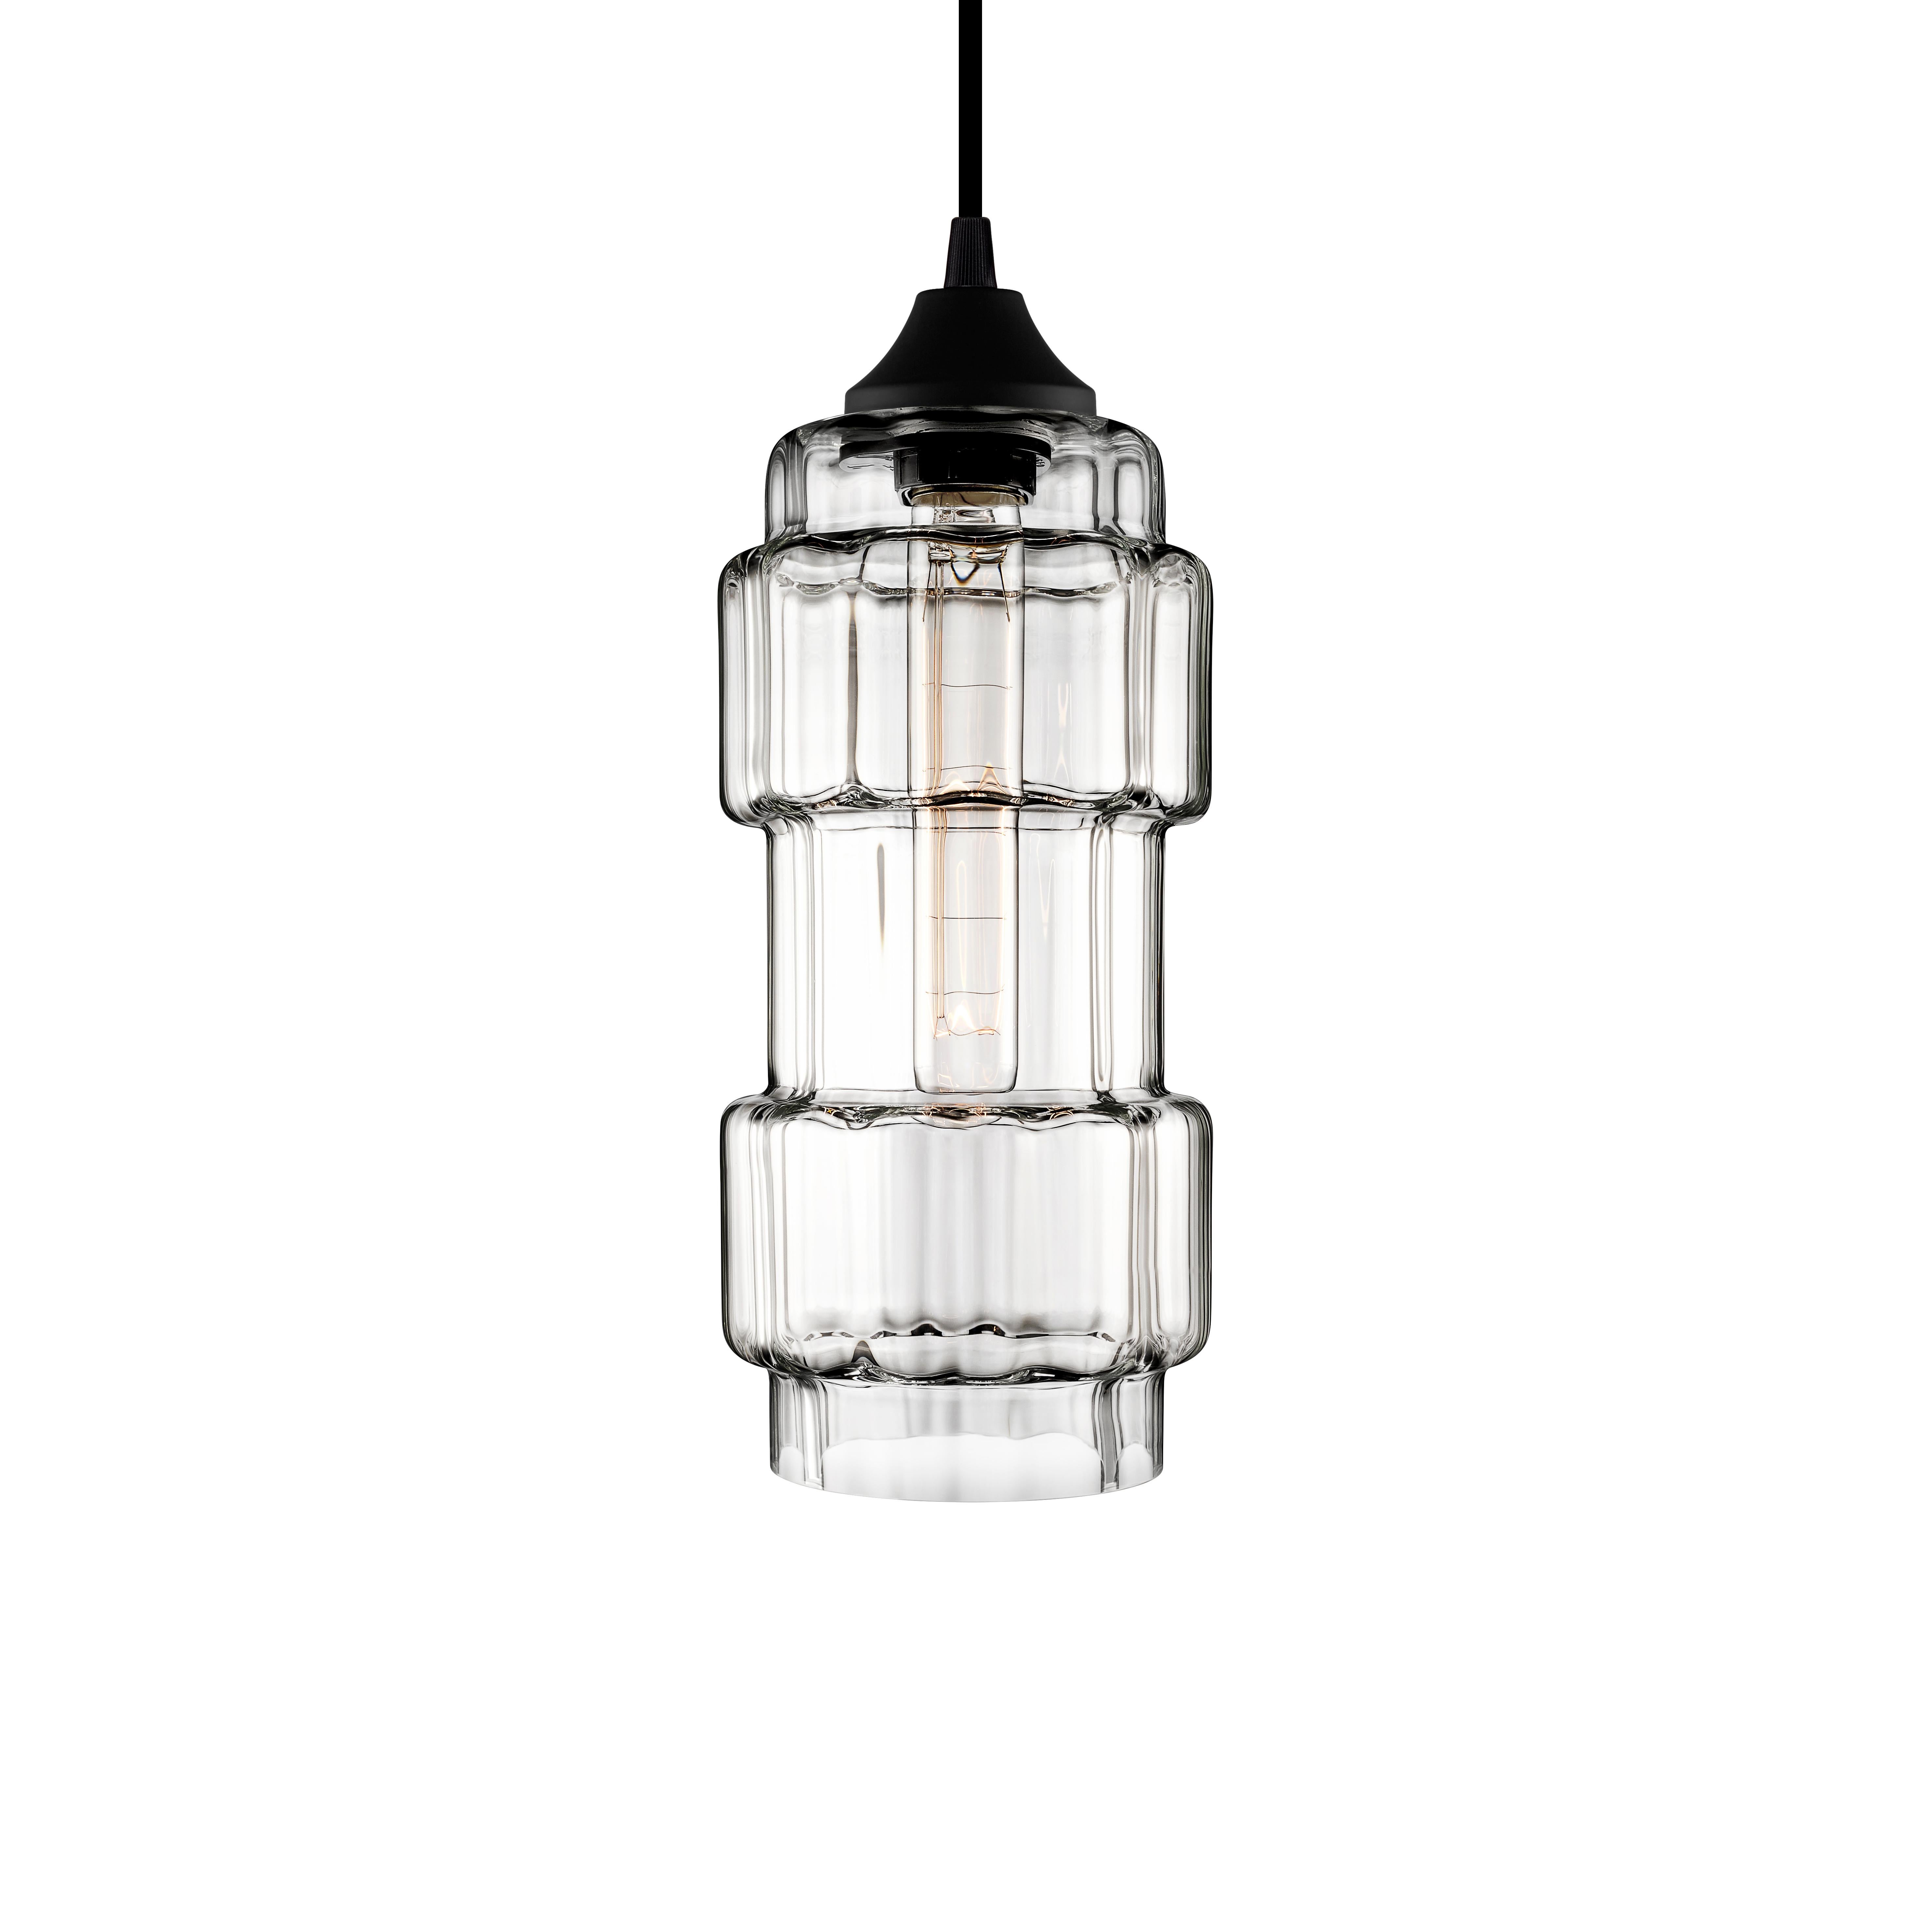 Muralla Gray Optique Handblown Modern Glass Pendant Light, Made in the USA In New Condition For Sale In Beacon, NY